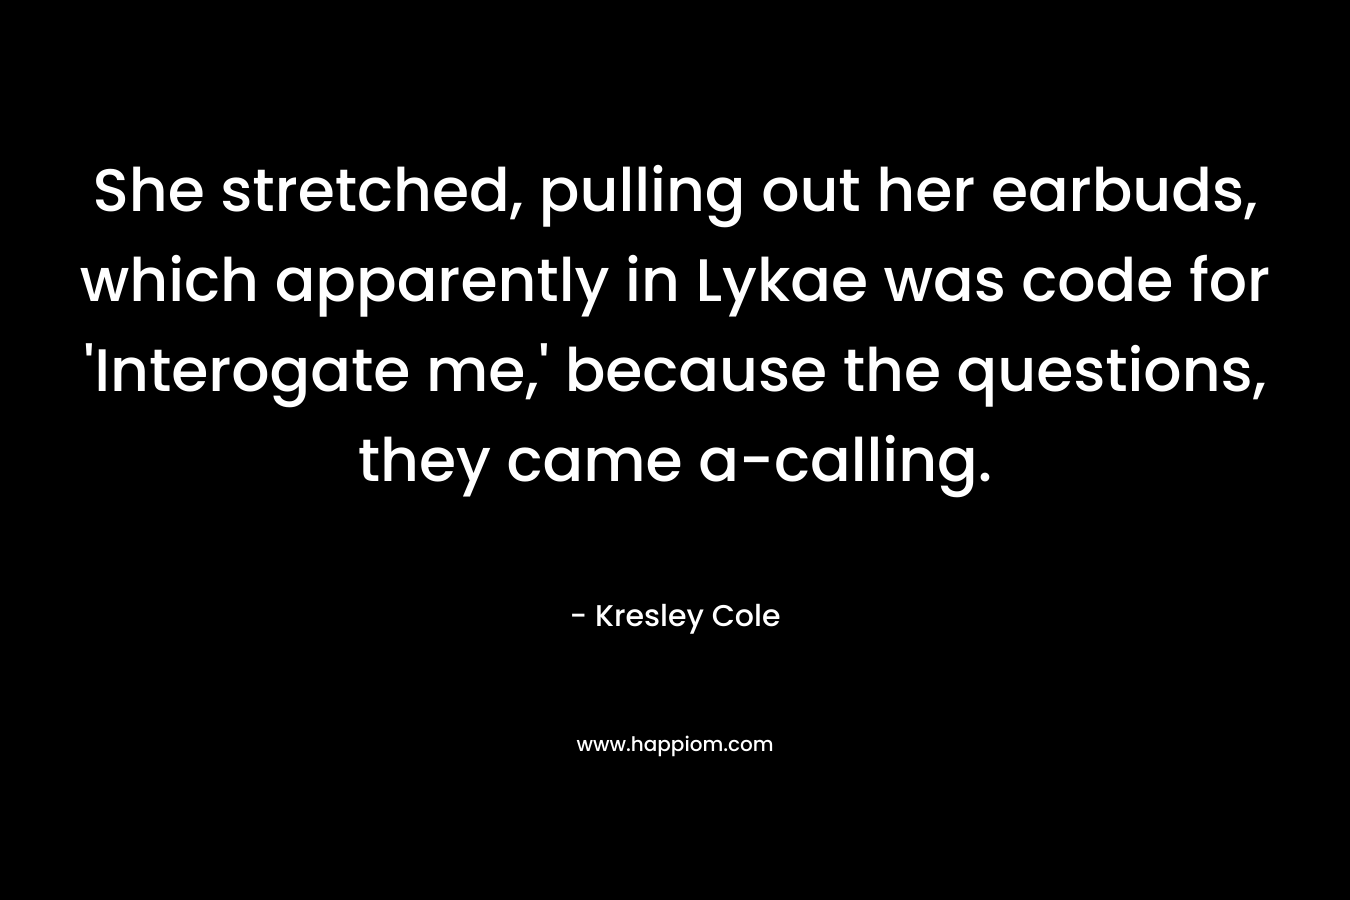 She stretched, pulling out her earbuds, which apparently in Lykae was code for 'Interogate me,' because the questions, they came a-calling.